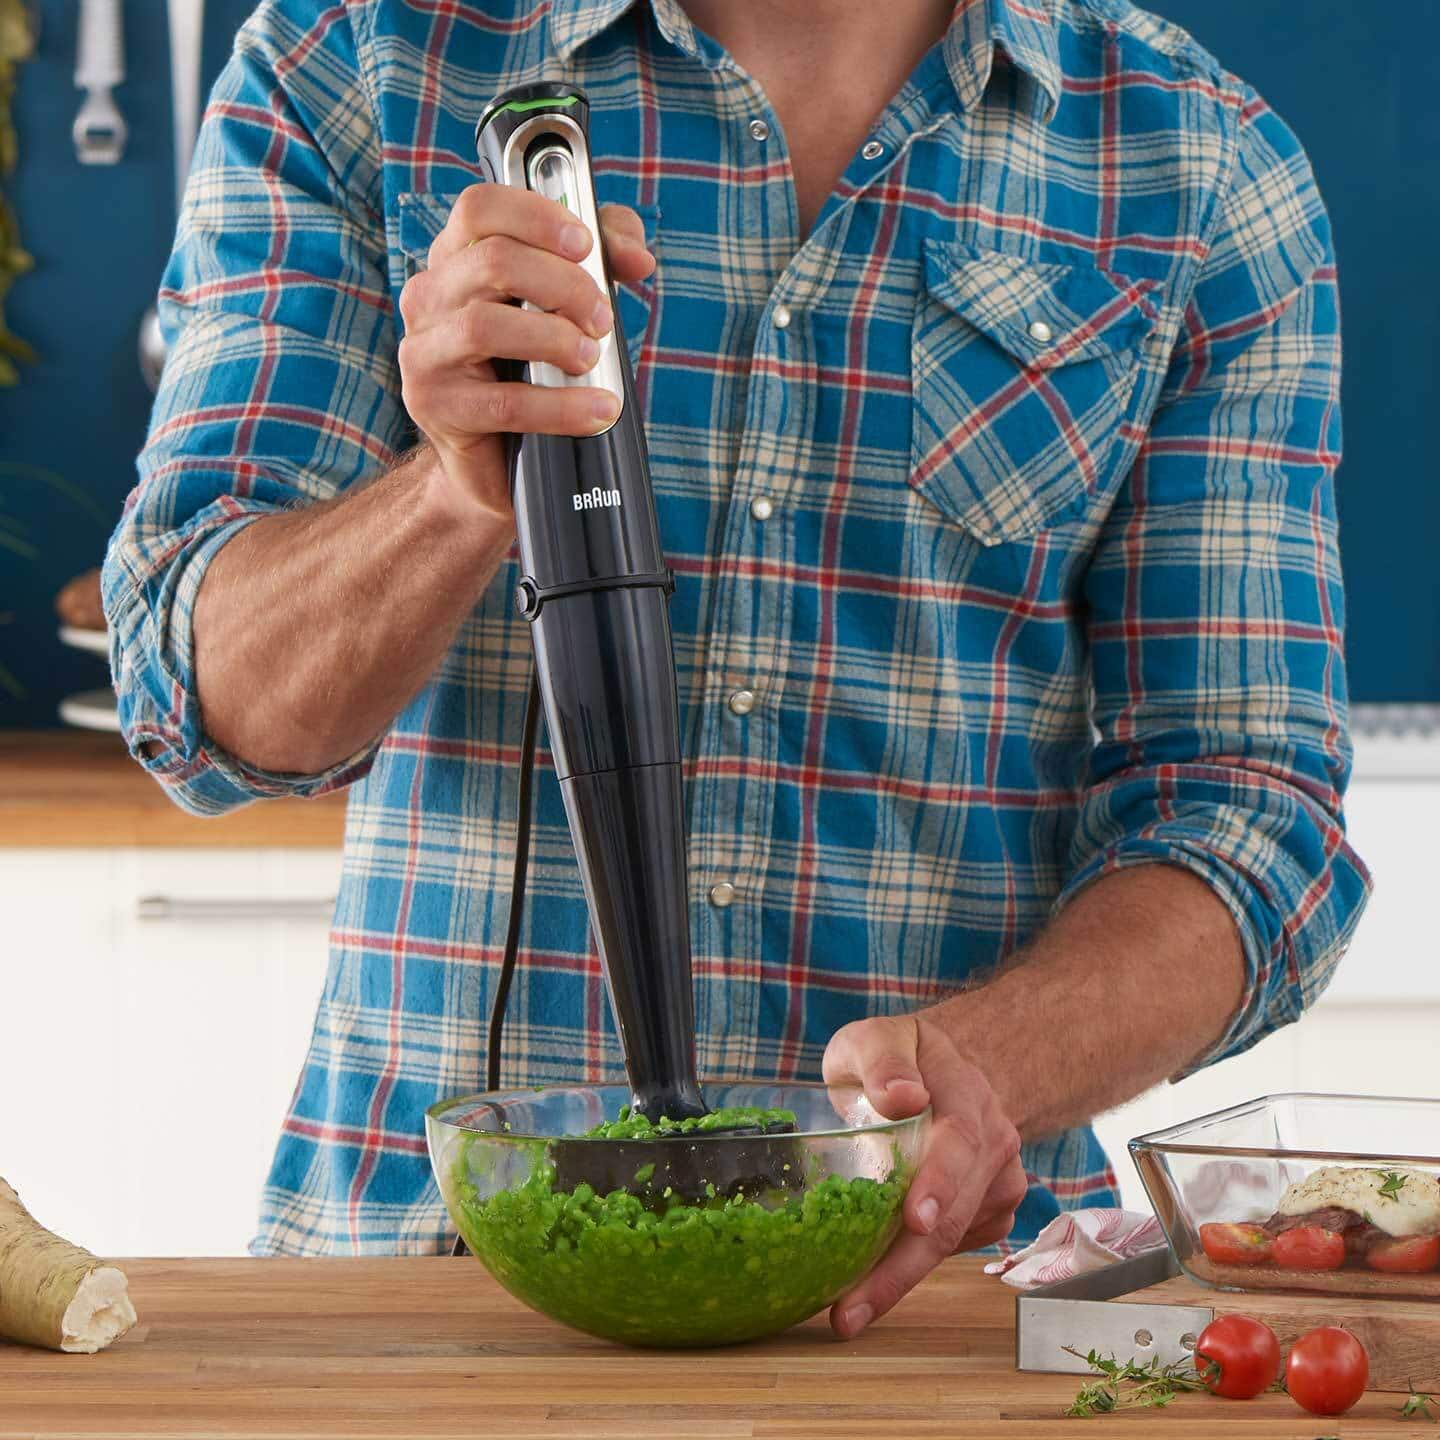 Braun Multiquick 7 Immersion Hand Blender - Ares Kitchen and